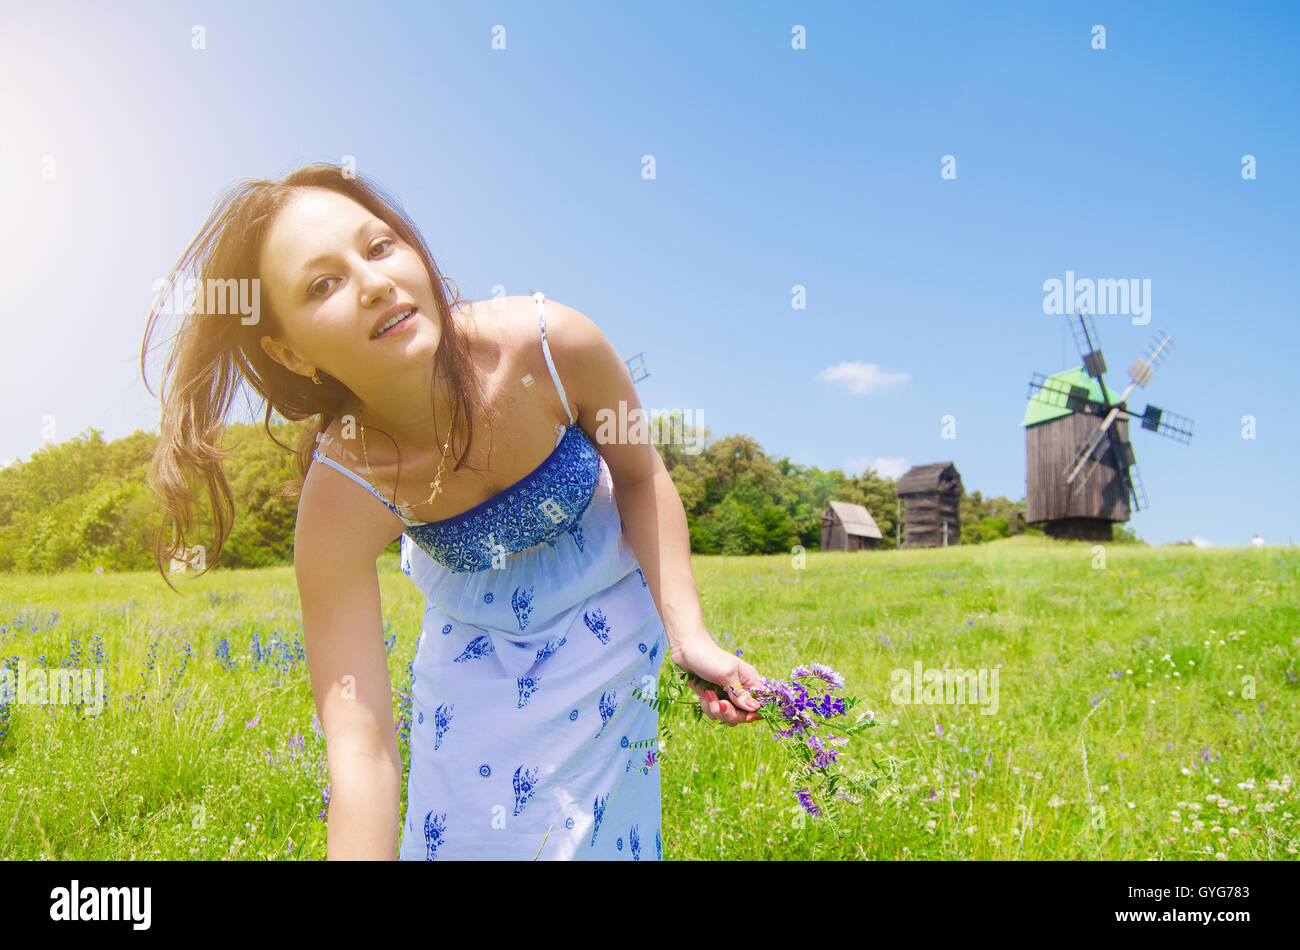 girl walking on the field with a bouquet of flowers Stock Photo